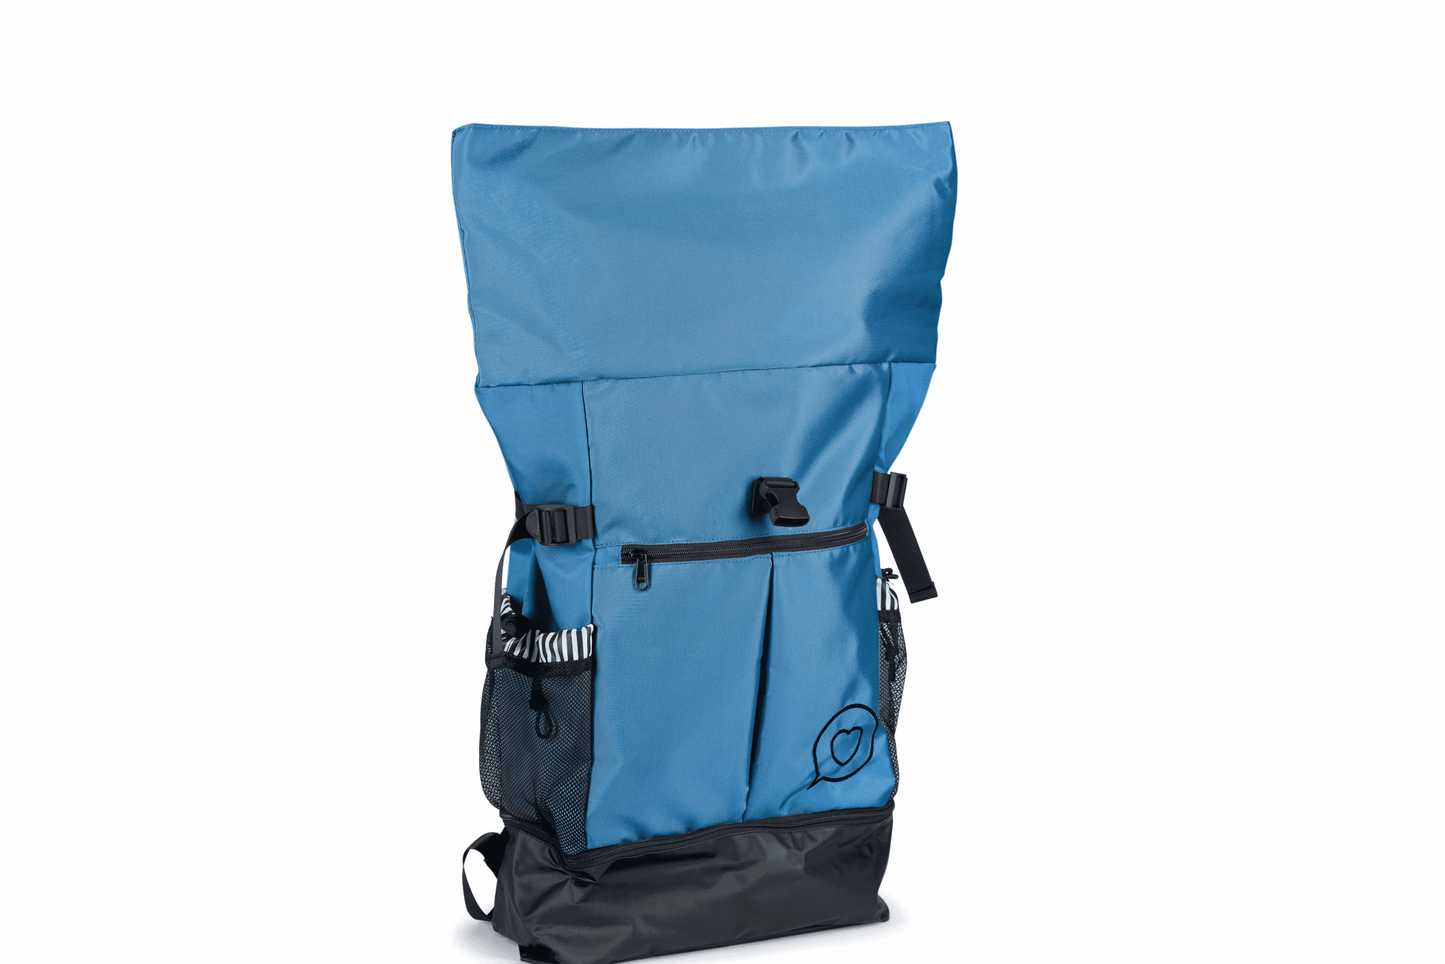 The Roo betty Nyx back pack has an extra large roll top for more space when you need it 